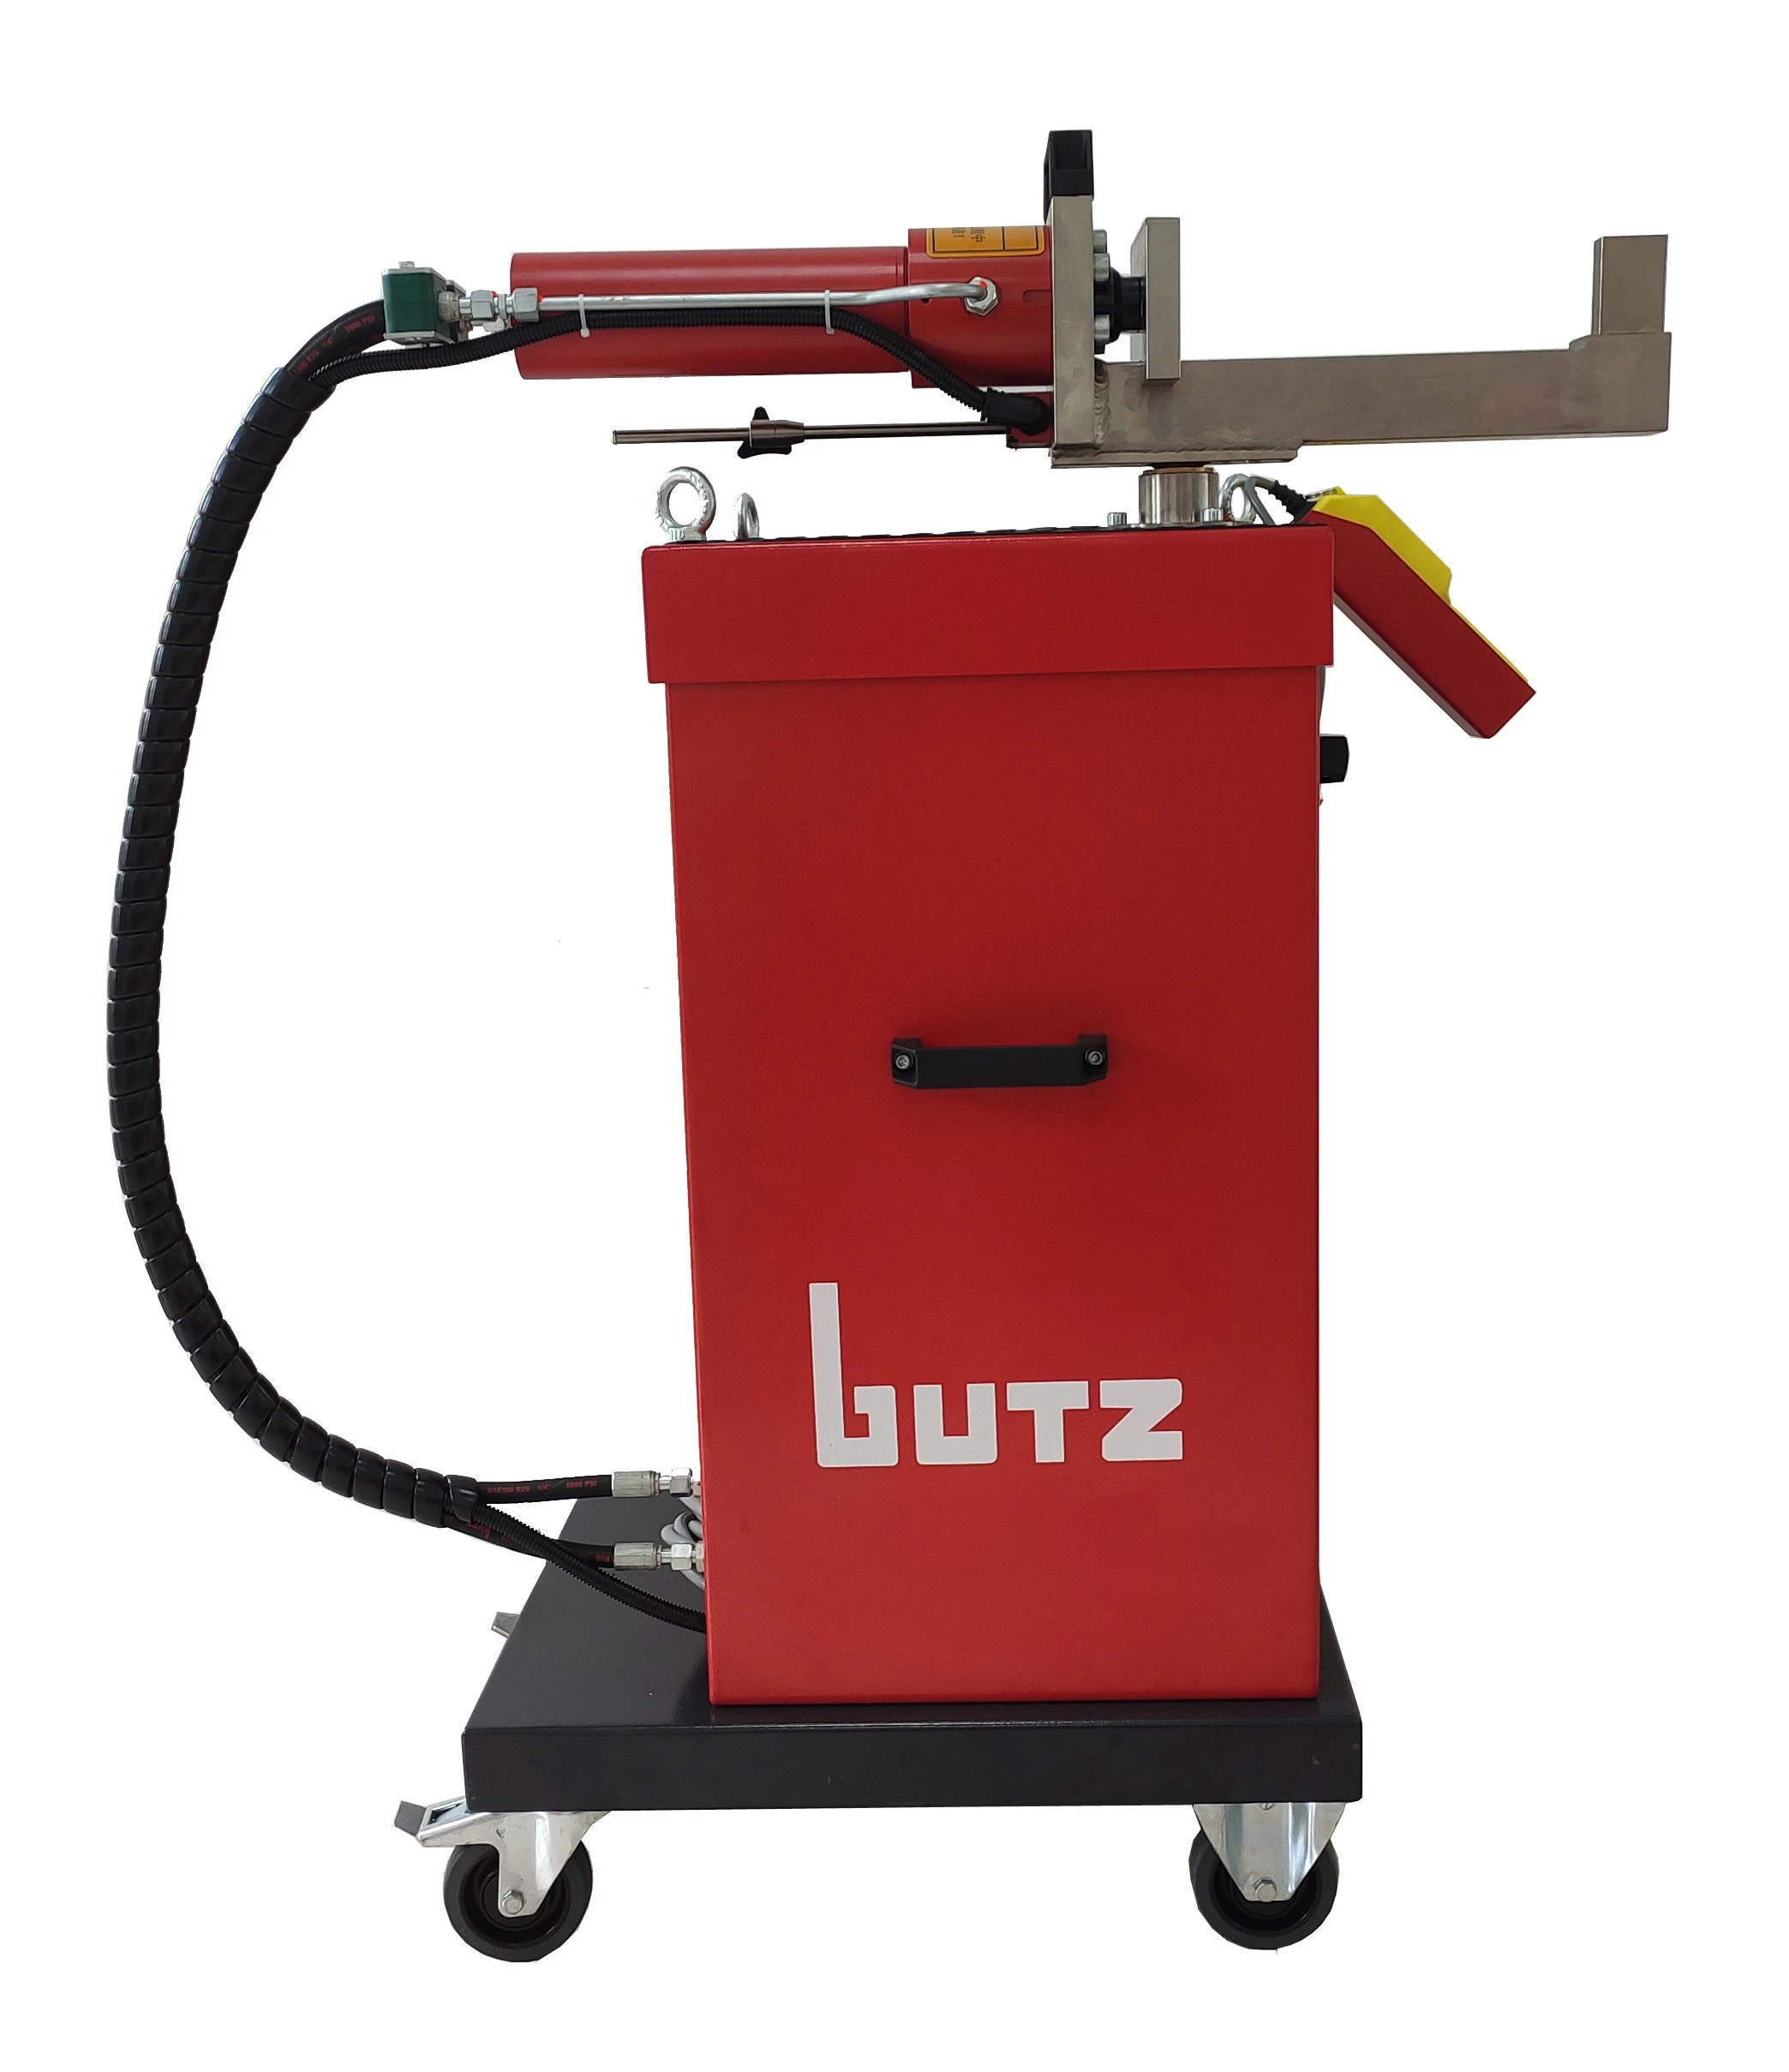 Butz non-cnc hydraulic tube pipe bender for the bending of hydraulic tubes in competitive prices